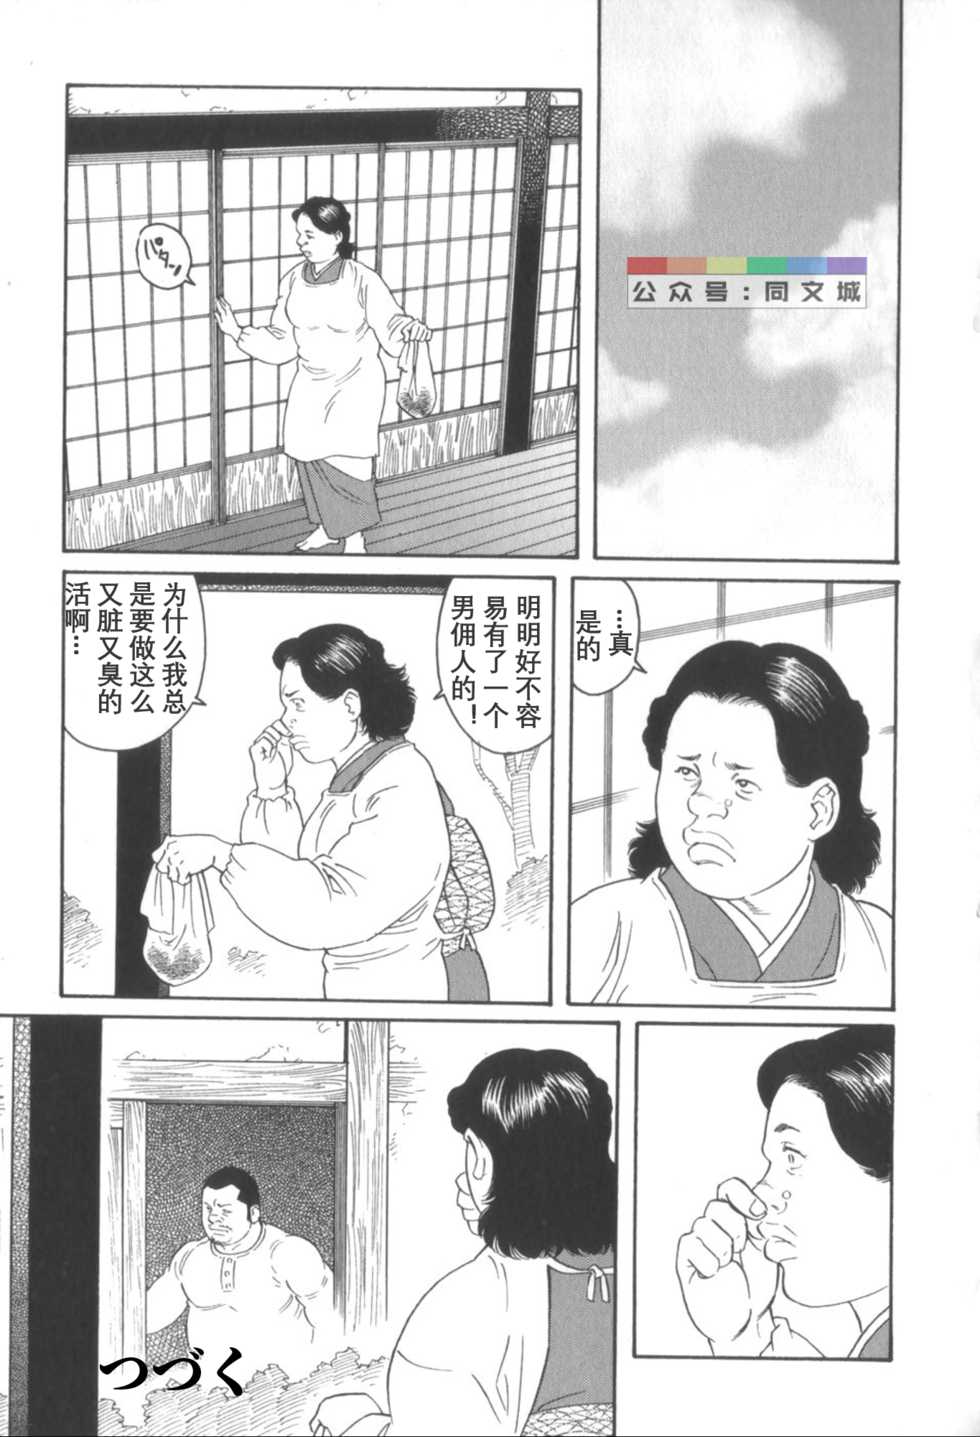 [Tagame Gengoroh] Gedo no Ie Gekan [Chinese][同文城] - Page 16